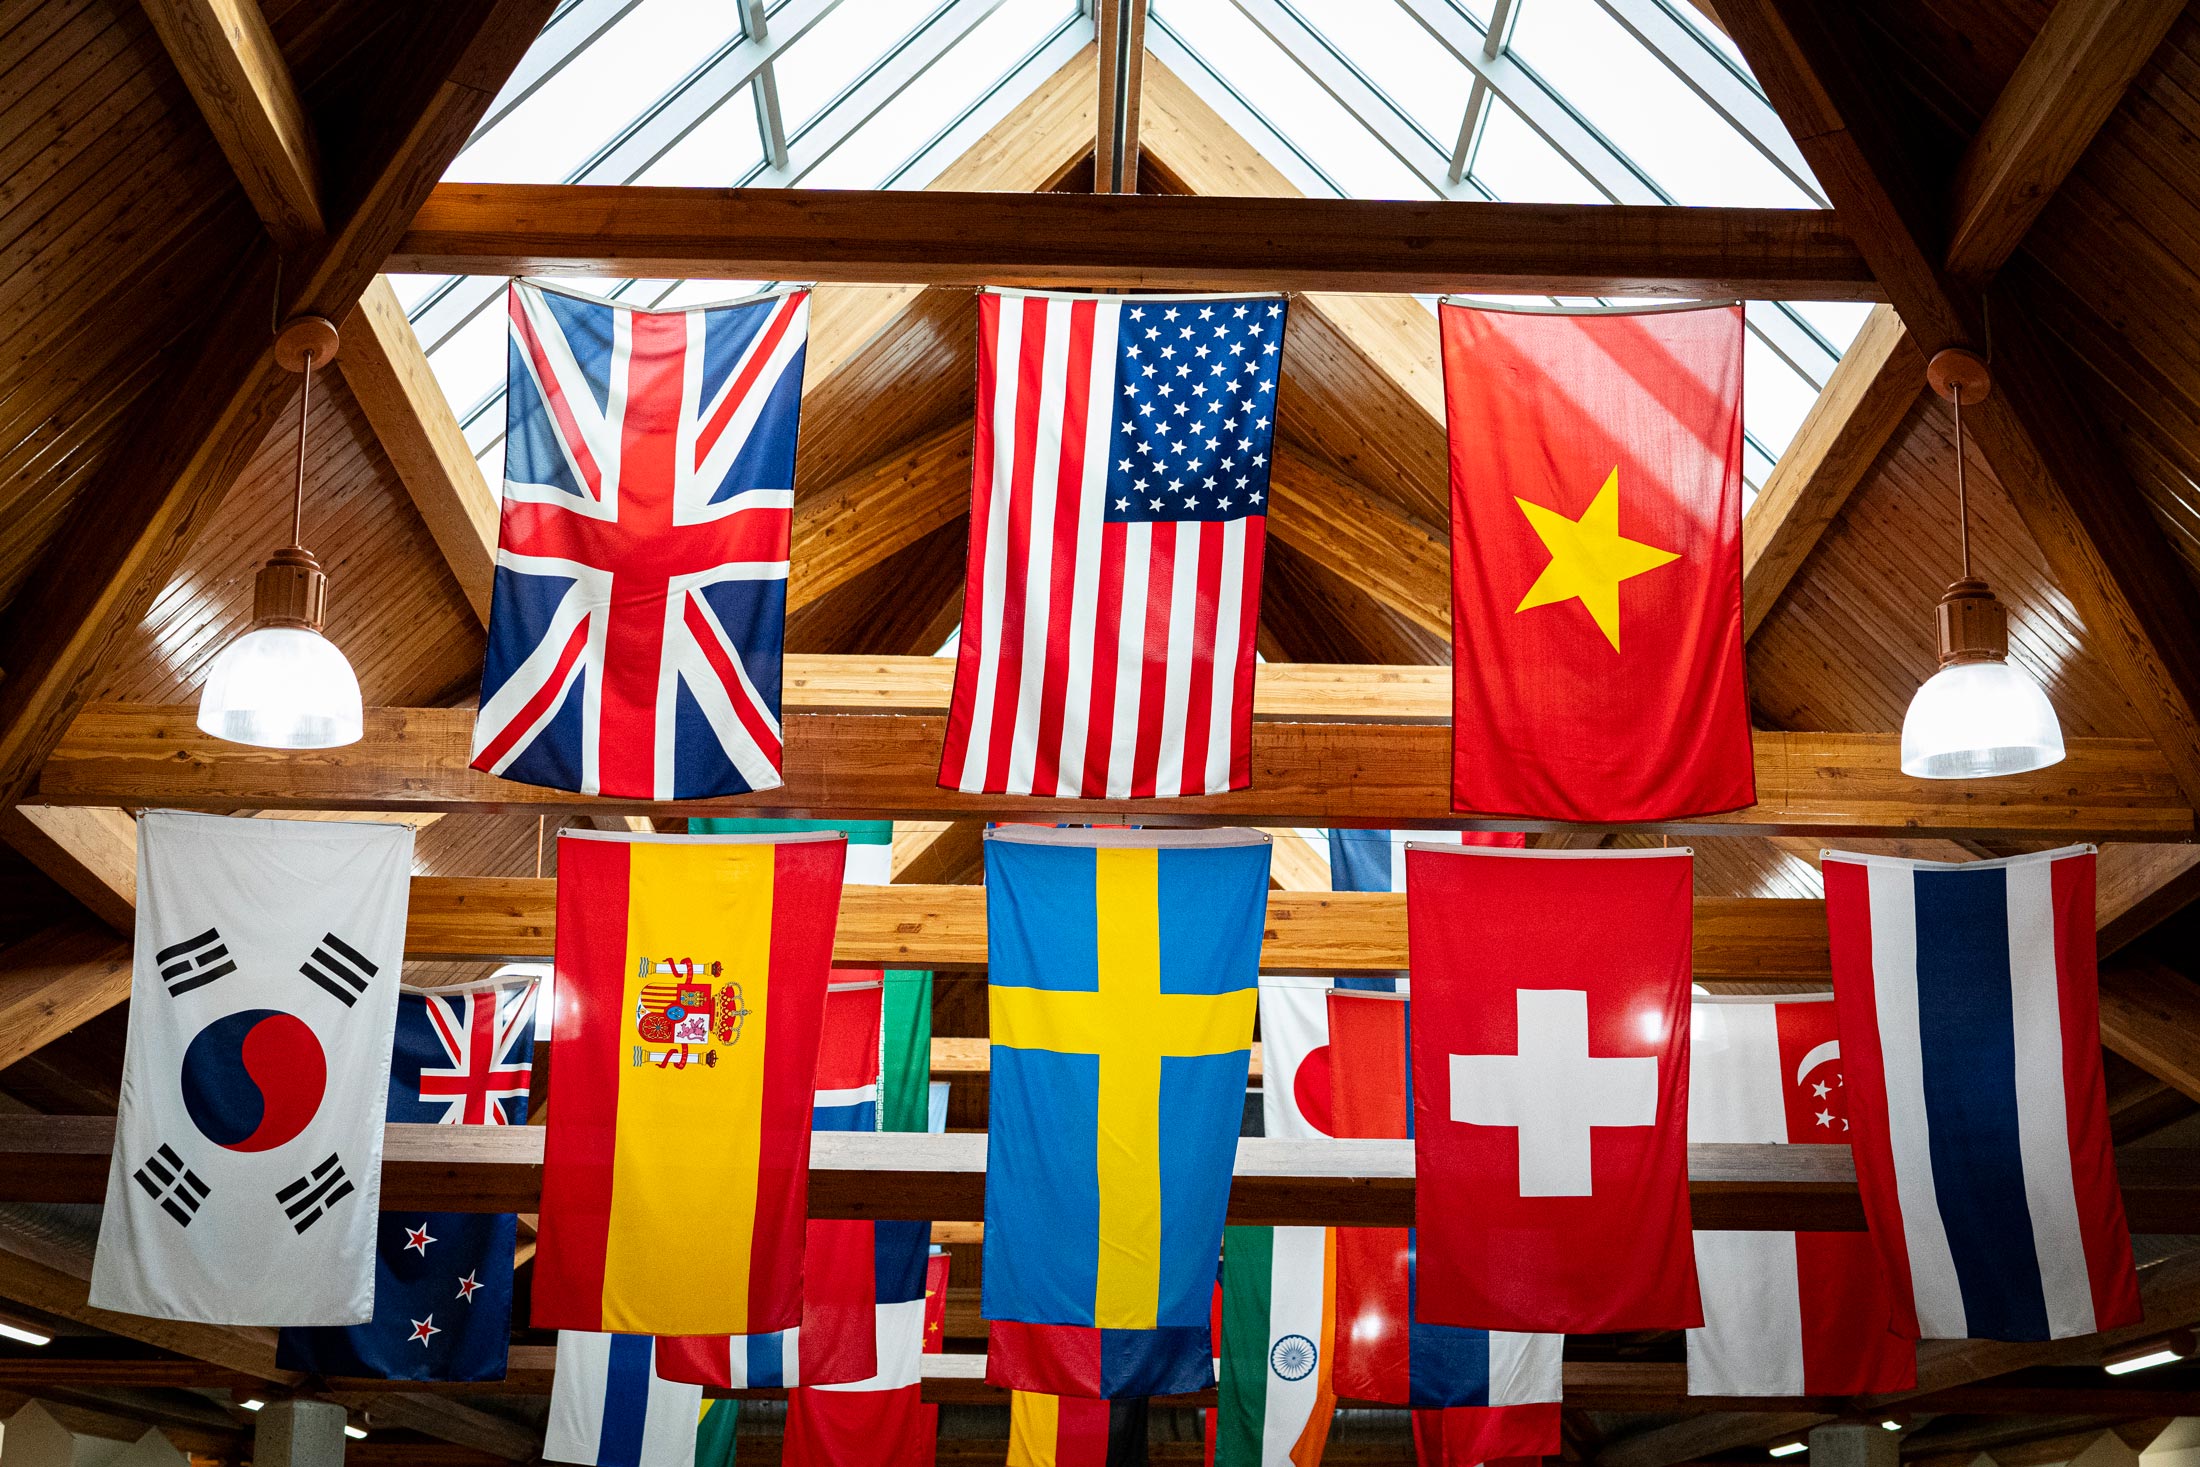 A diverse group of flags from different countries in the world hanging at Rockridge Secondary